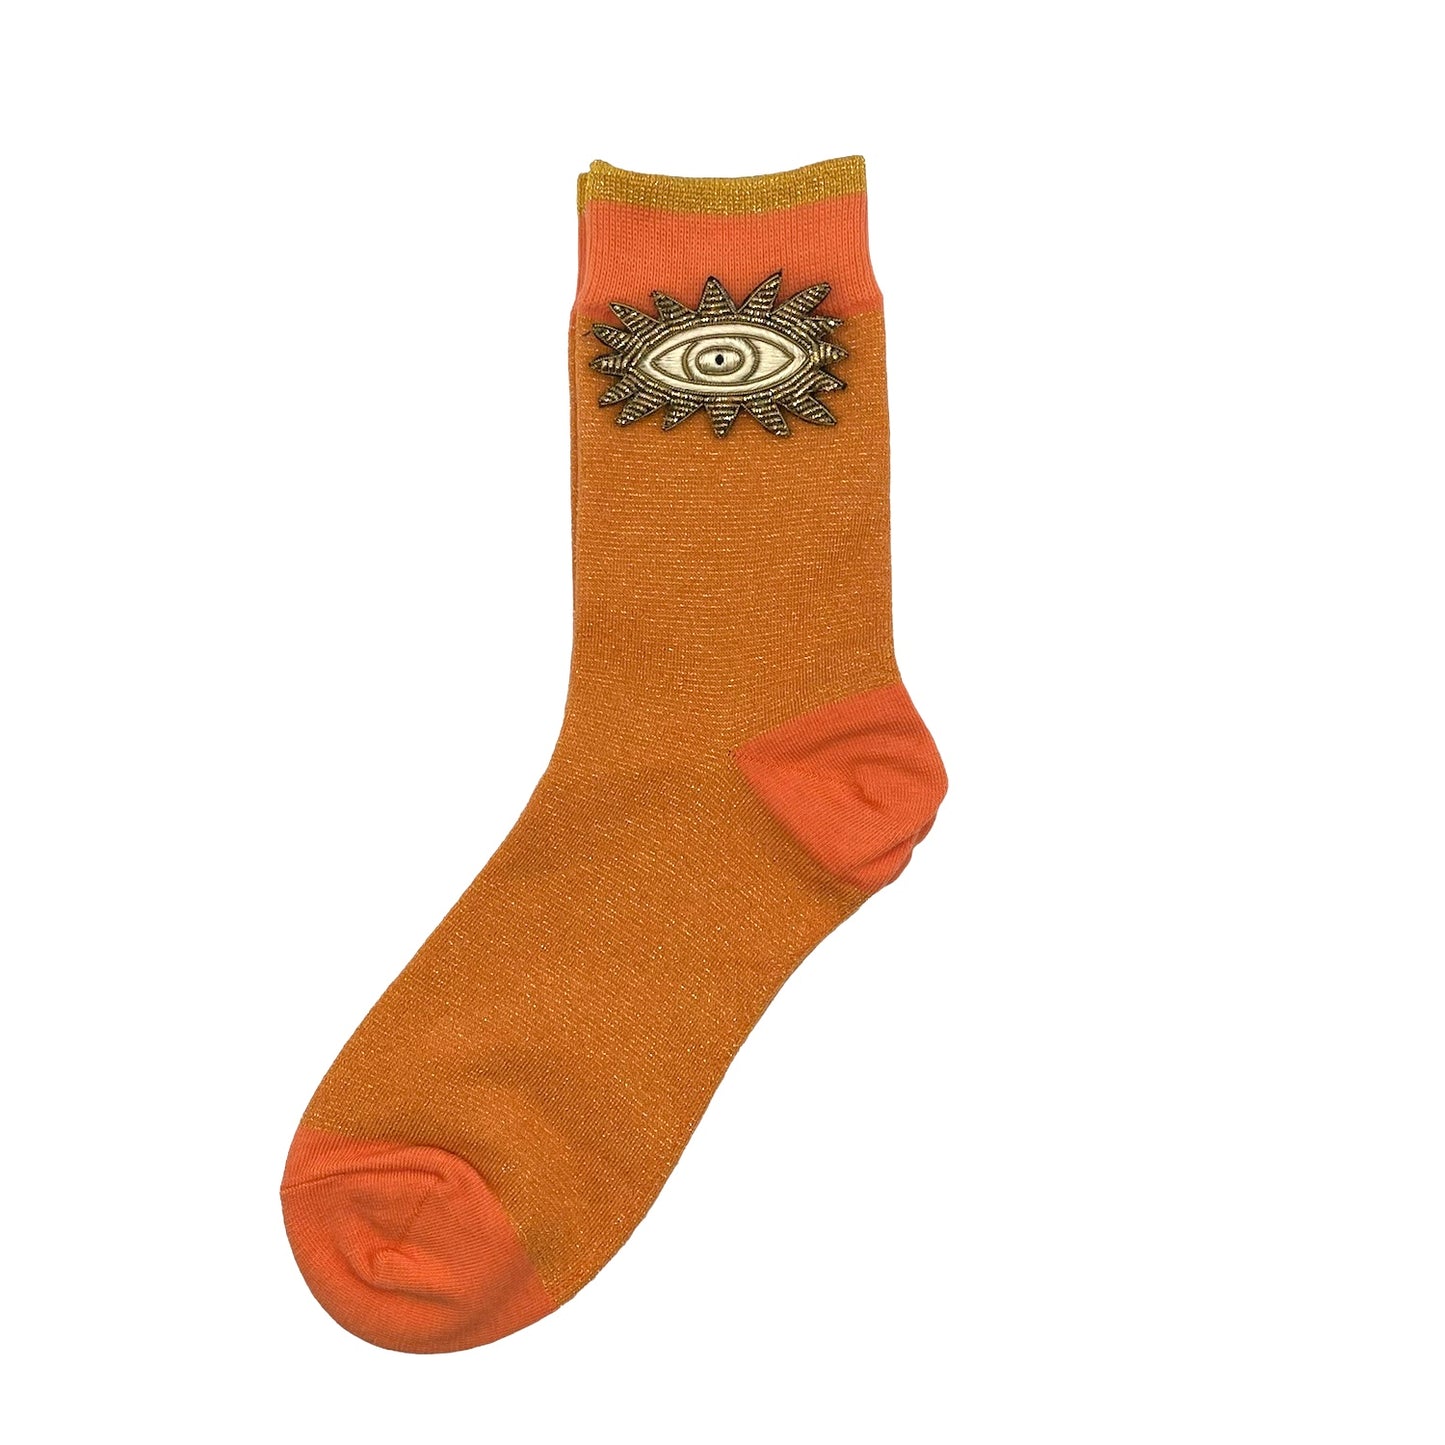 Tokyo socks in cantaloupe with a metallic eyes brooch